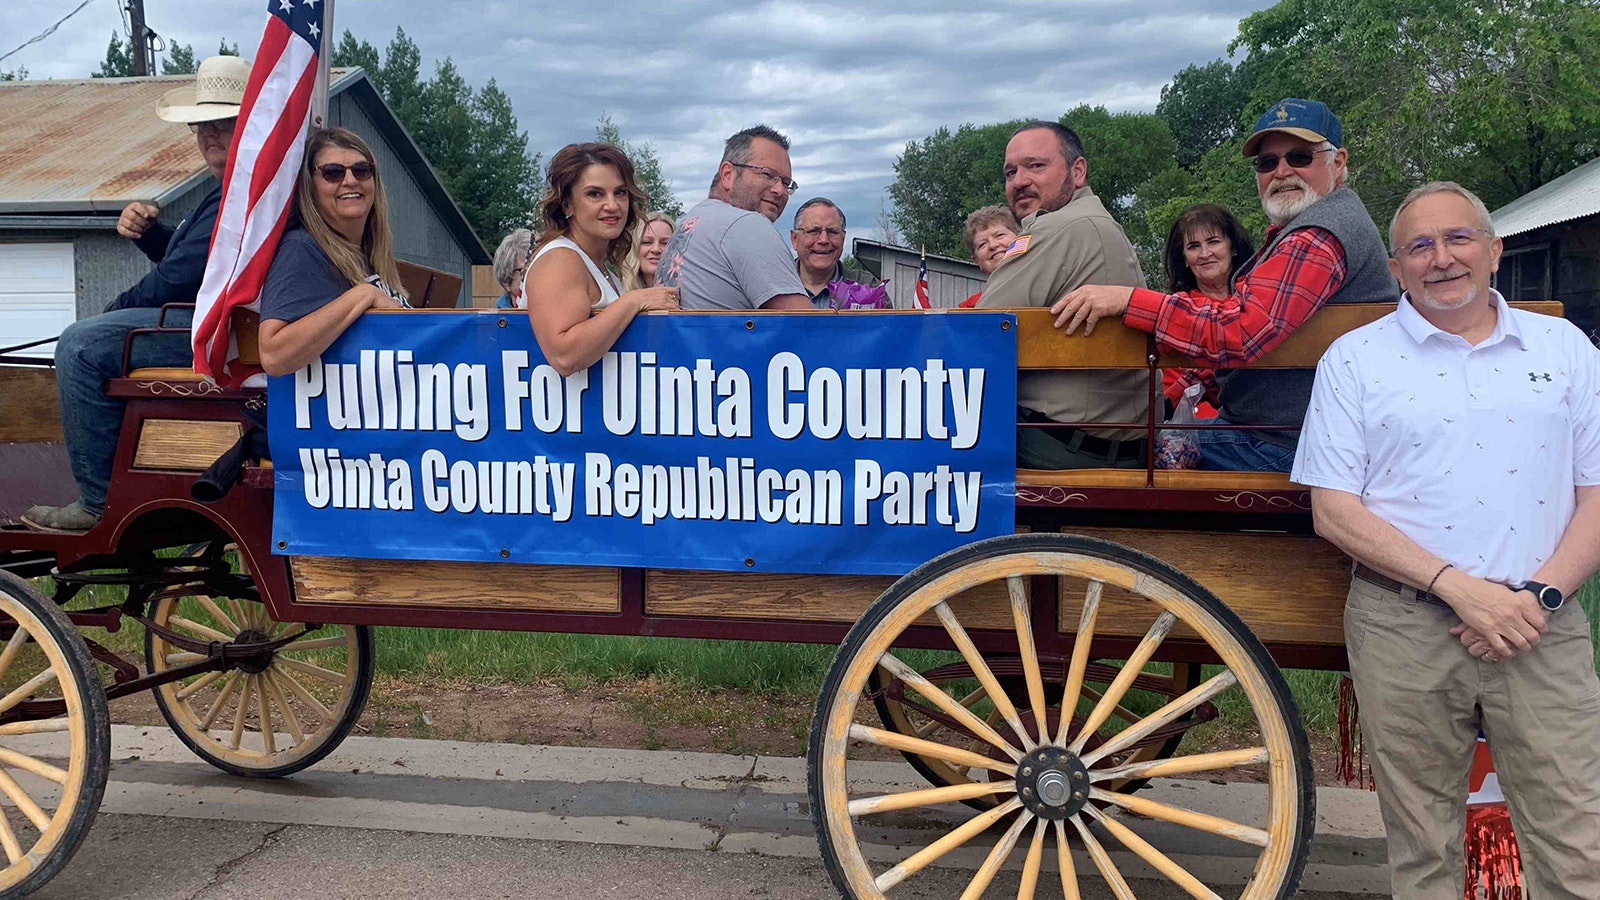 State Rep. John Conrad, far right, was among those who sued the Uinta County Republican Party over the party's 2021 leadership elections.